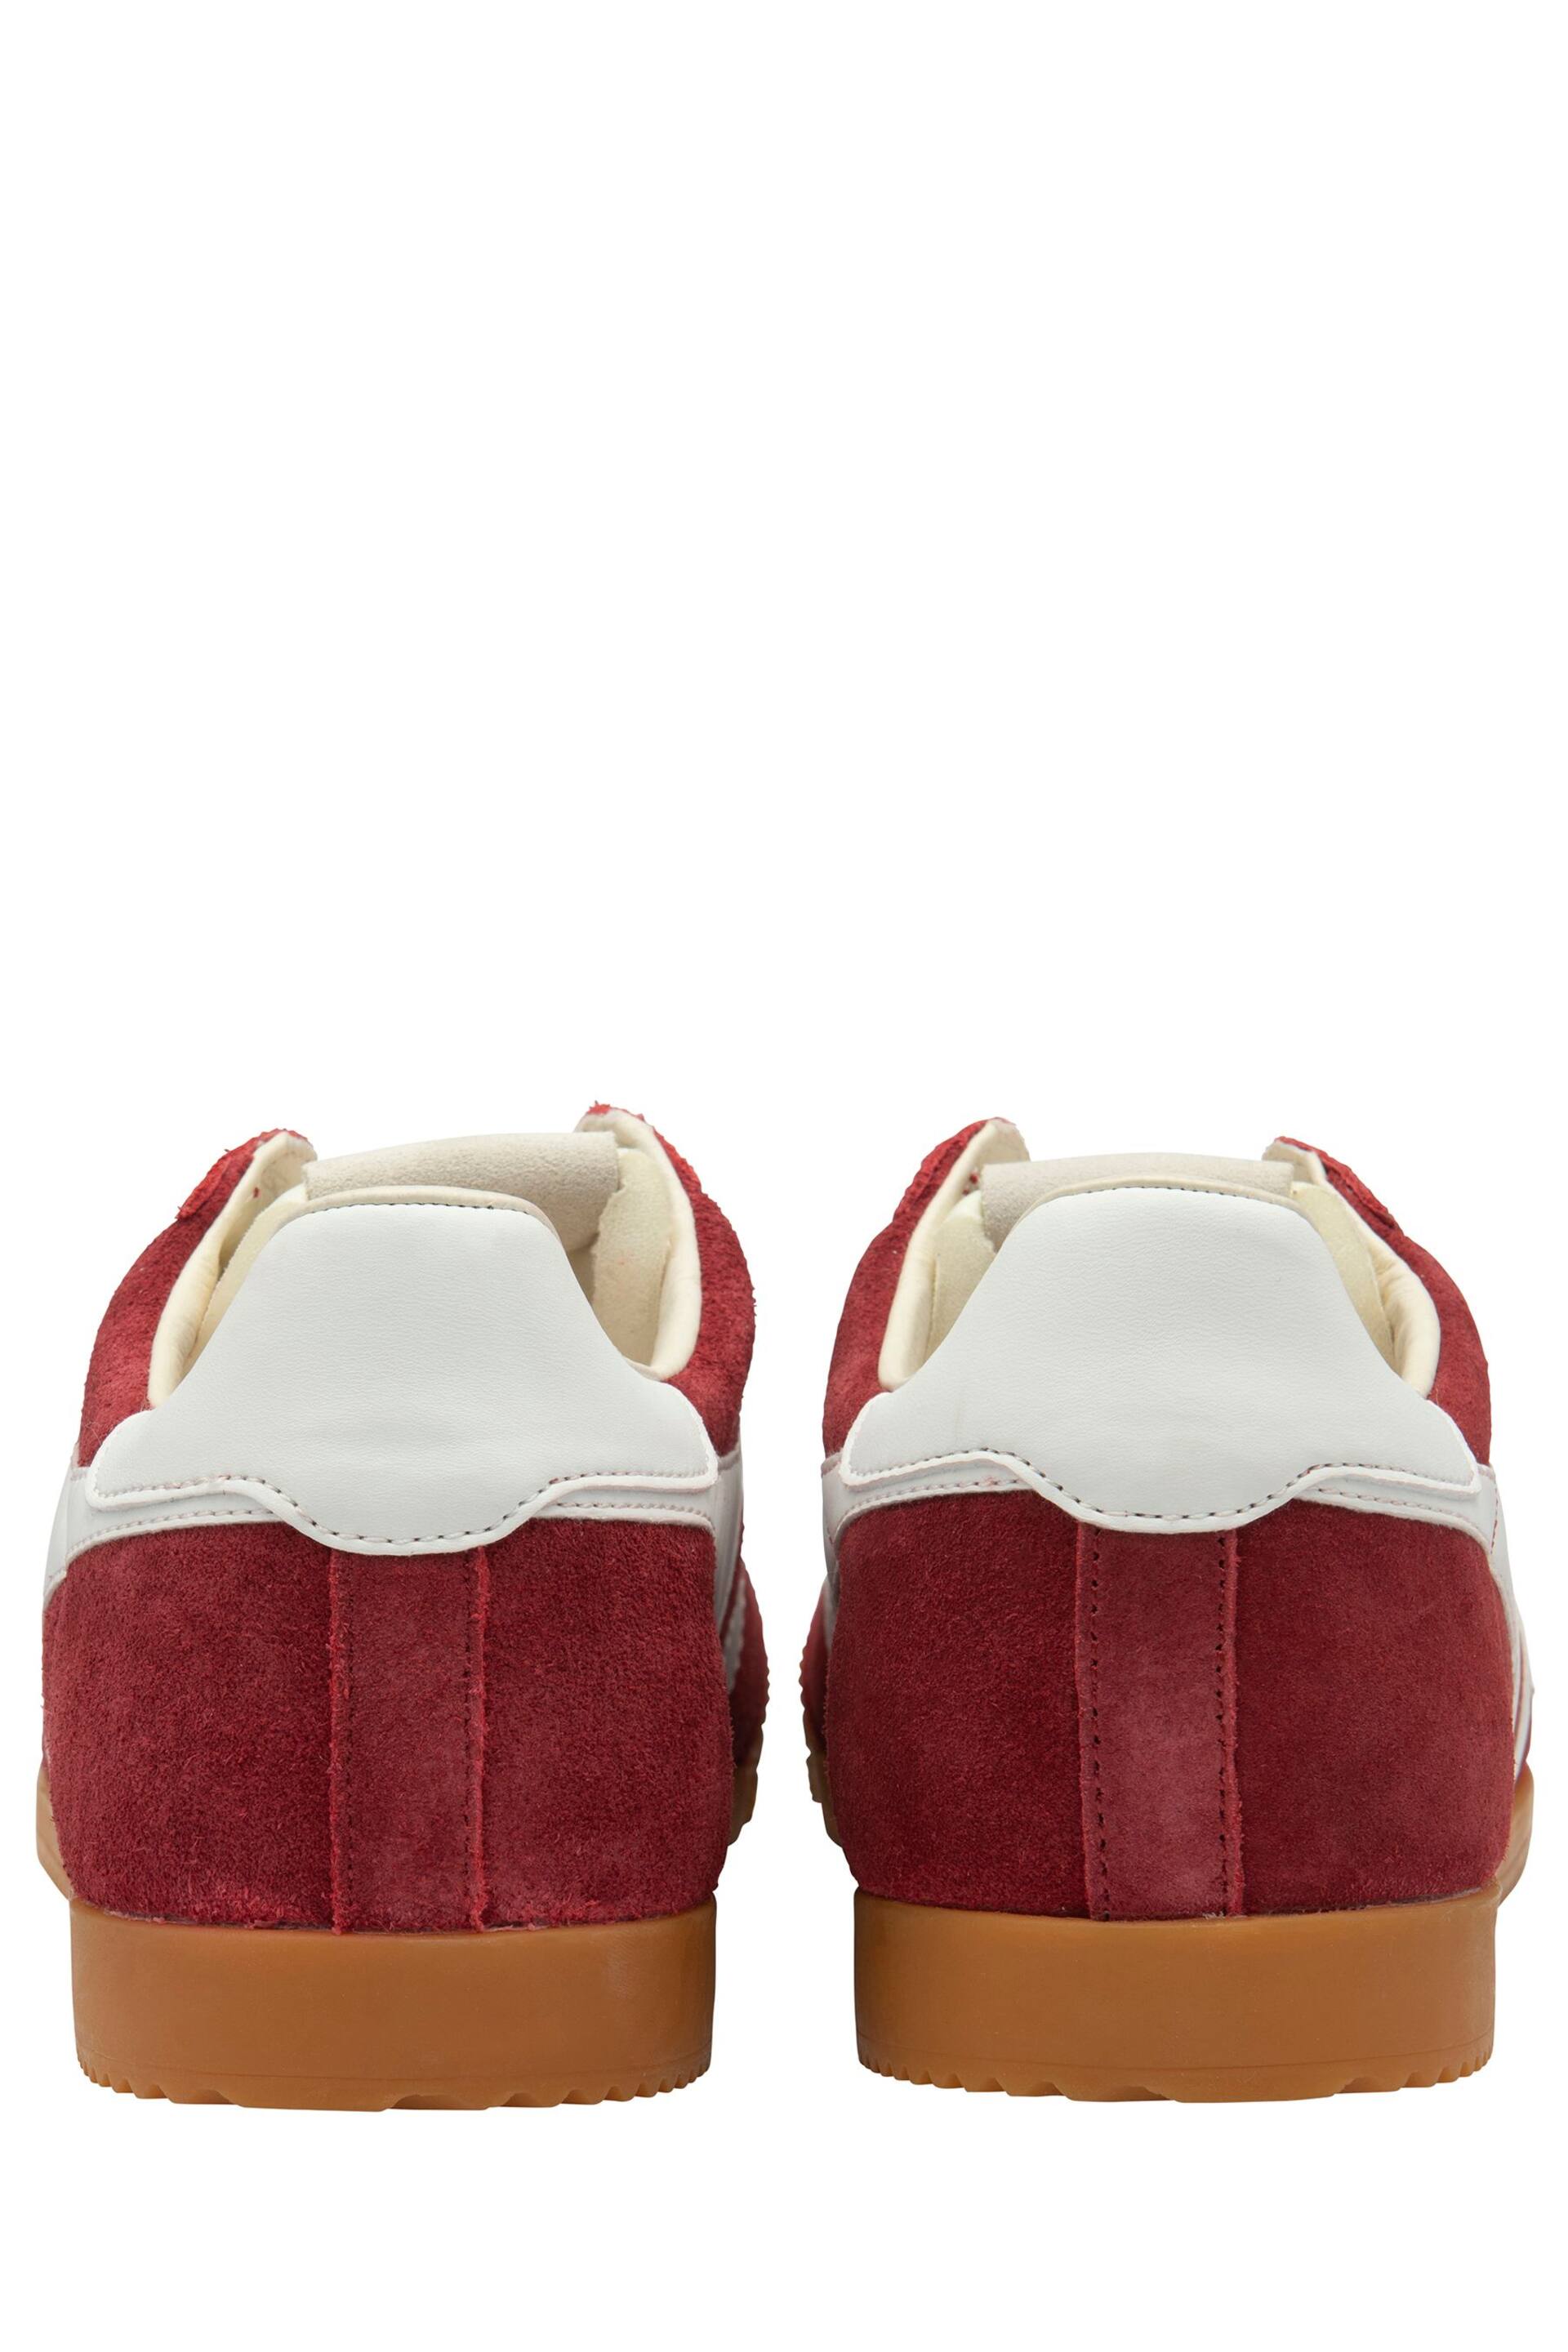 Gola Red Mens Elan Suede Lace-Up Trainers - Image 3 of 4